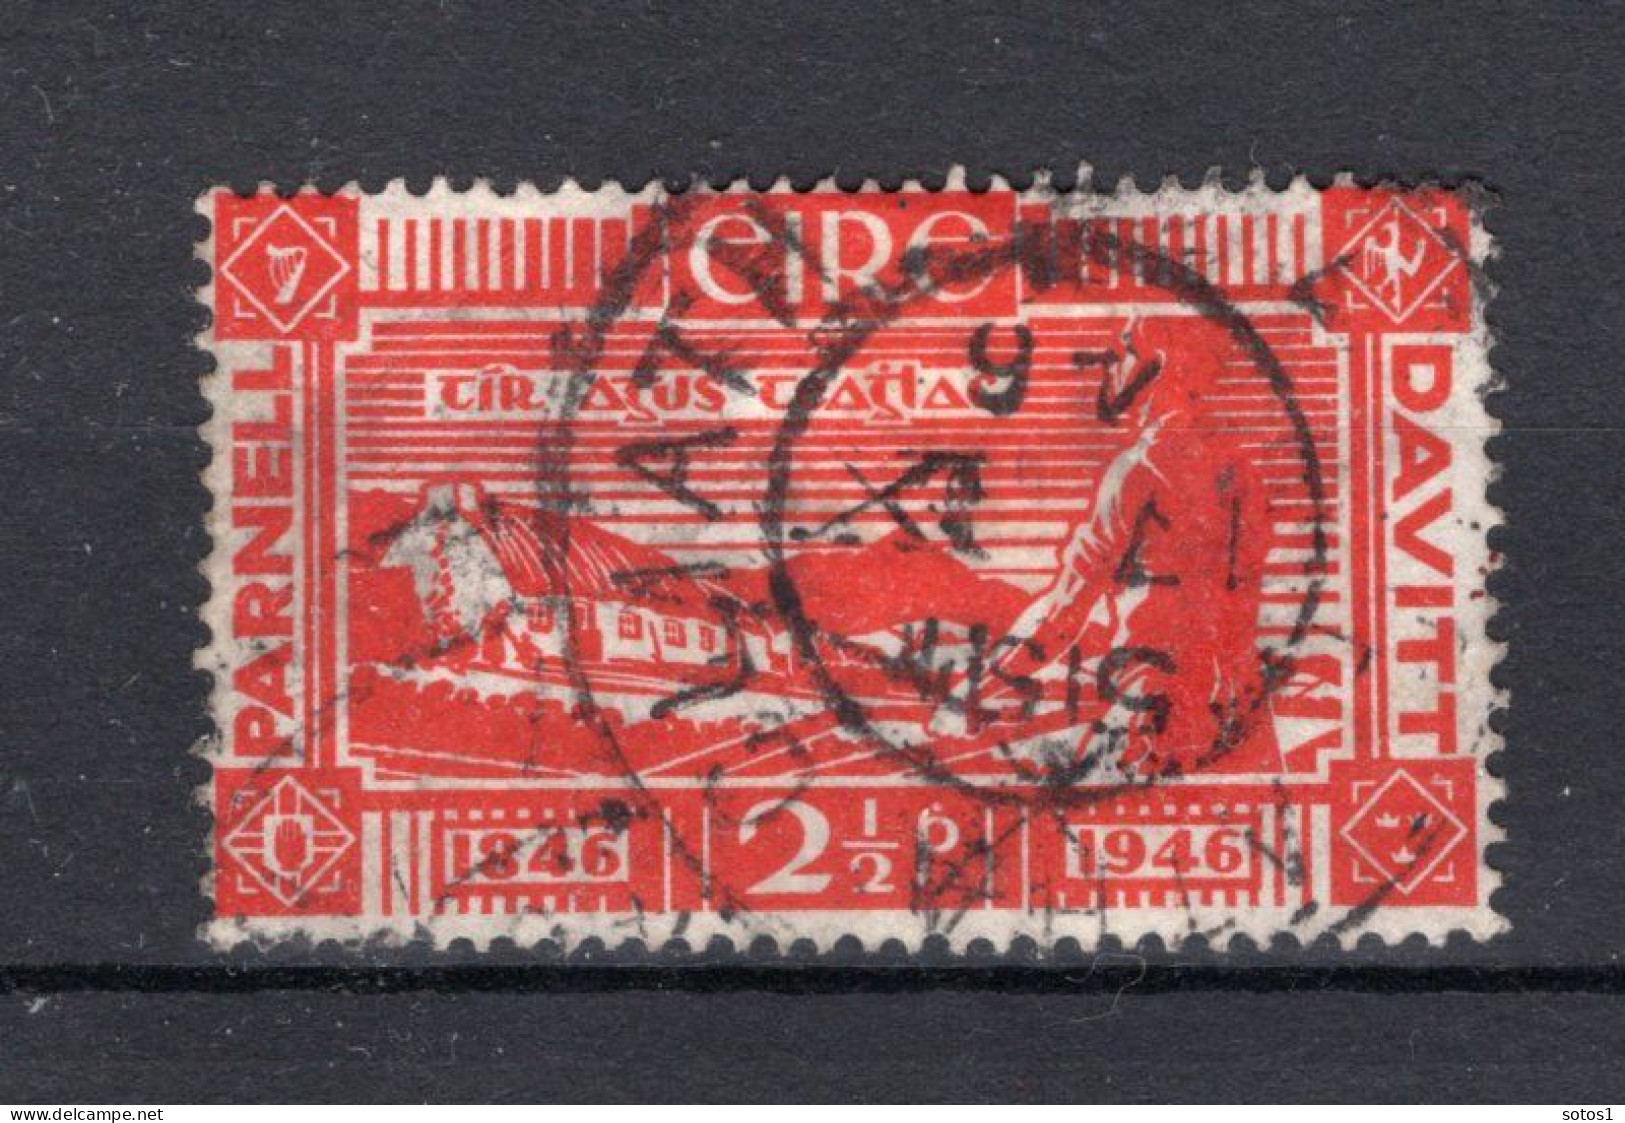 IERLAND Yt. 104° Gestempeld 1946 - Used Stamps